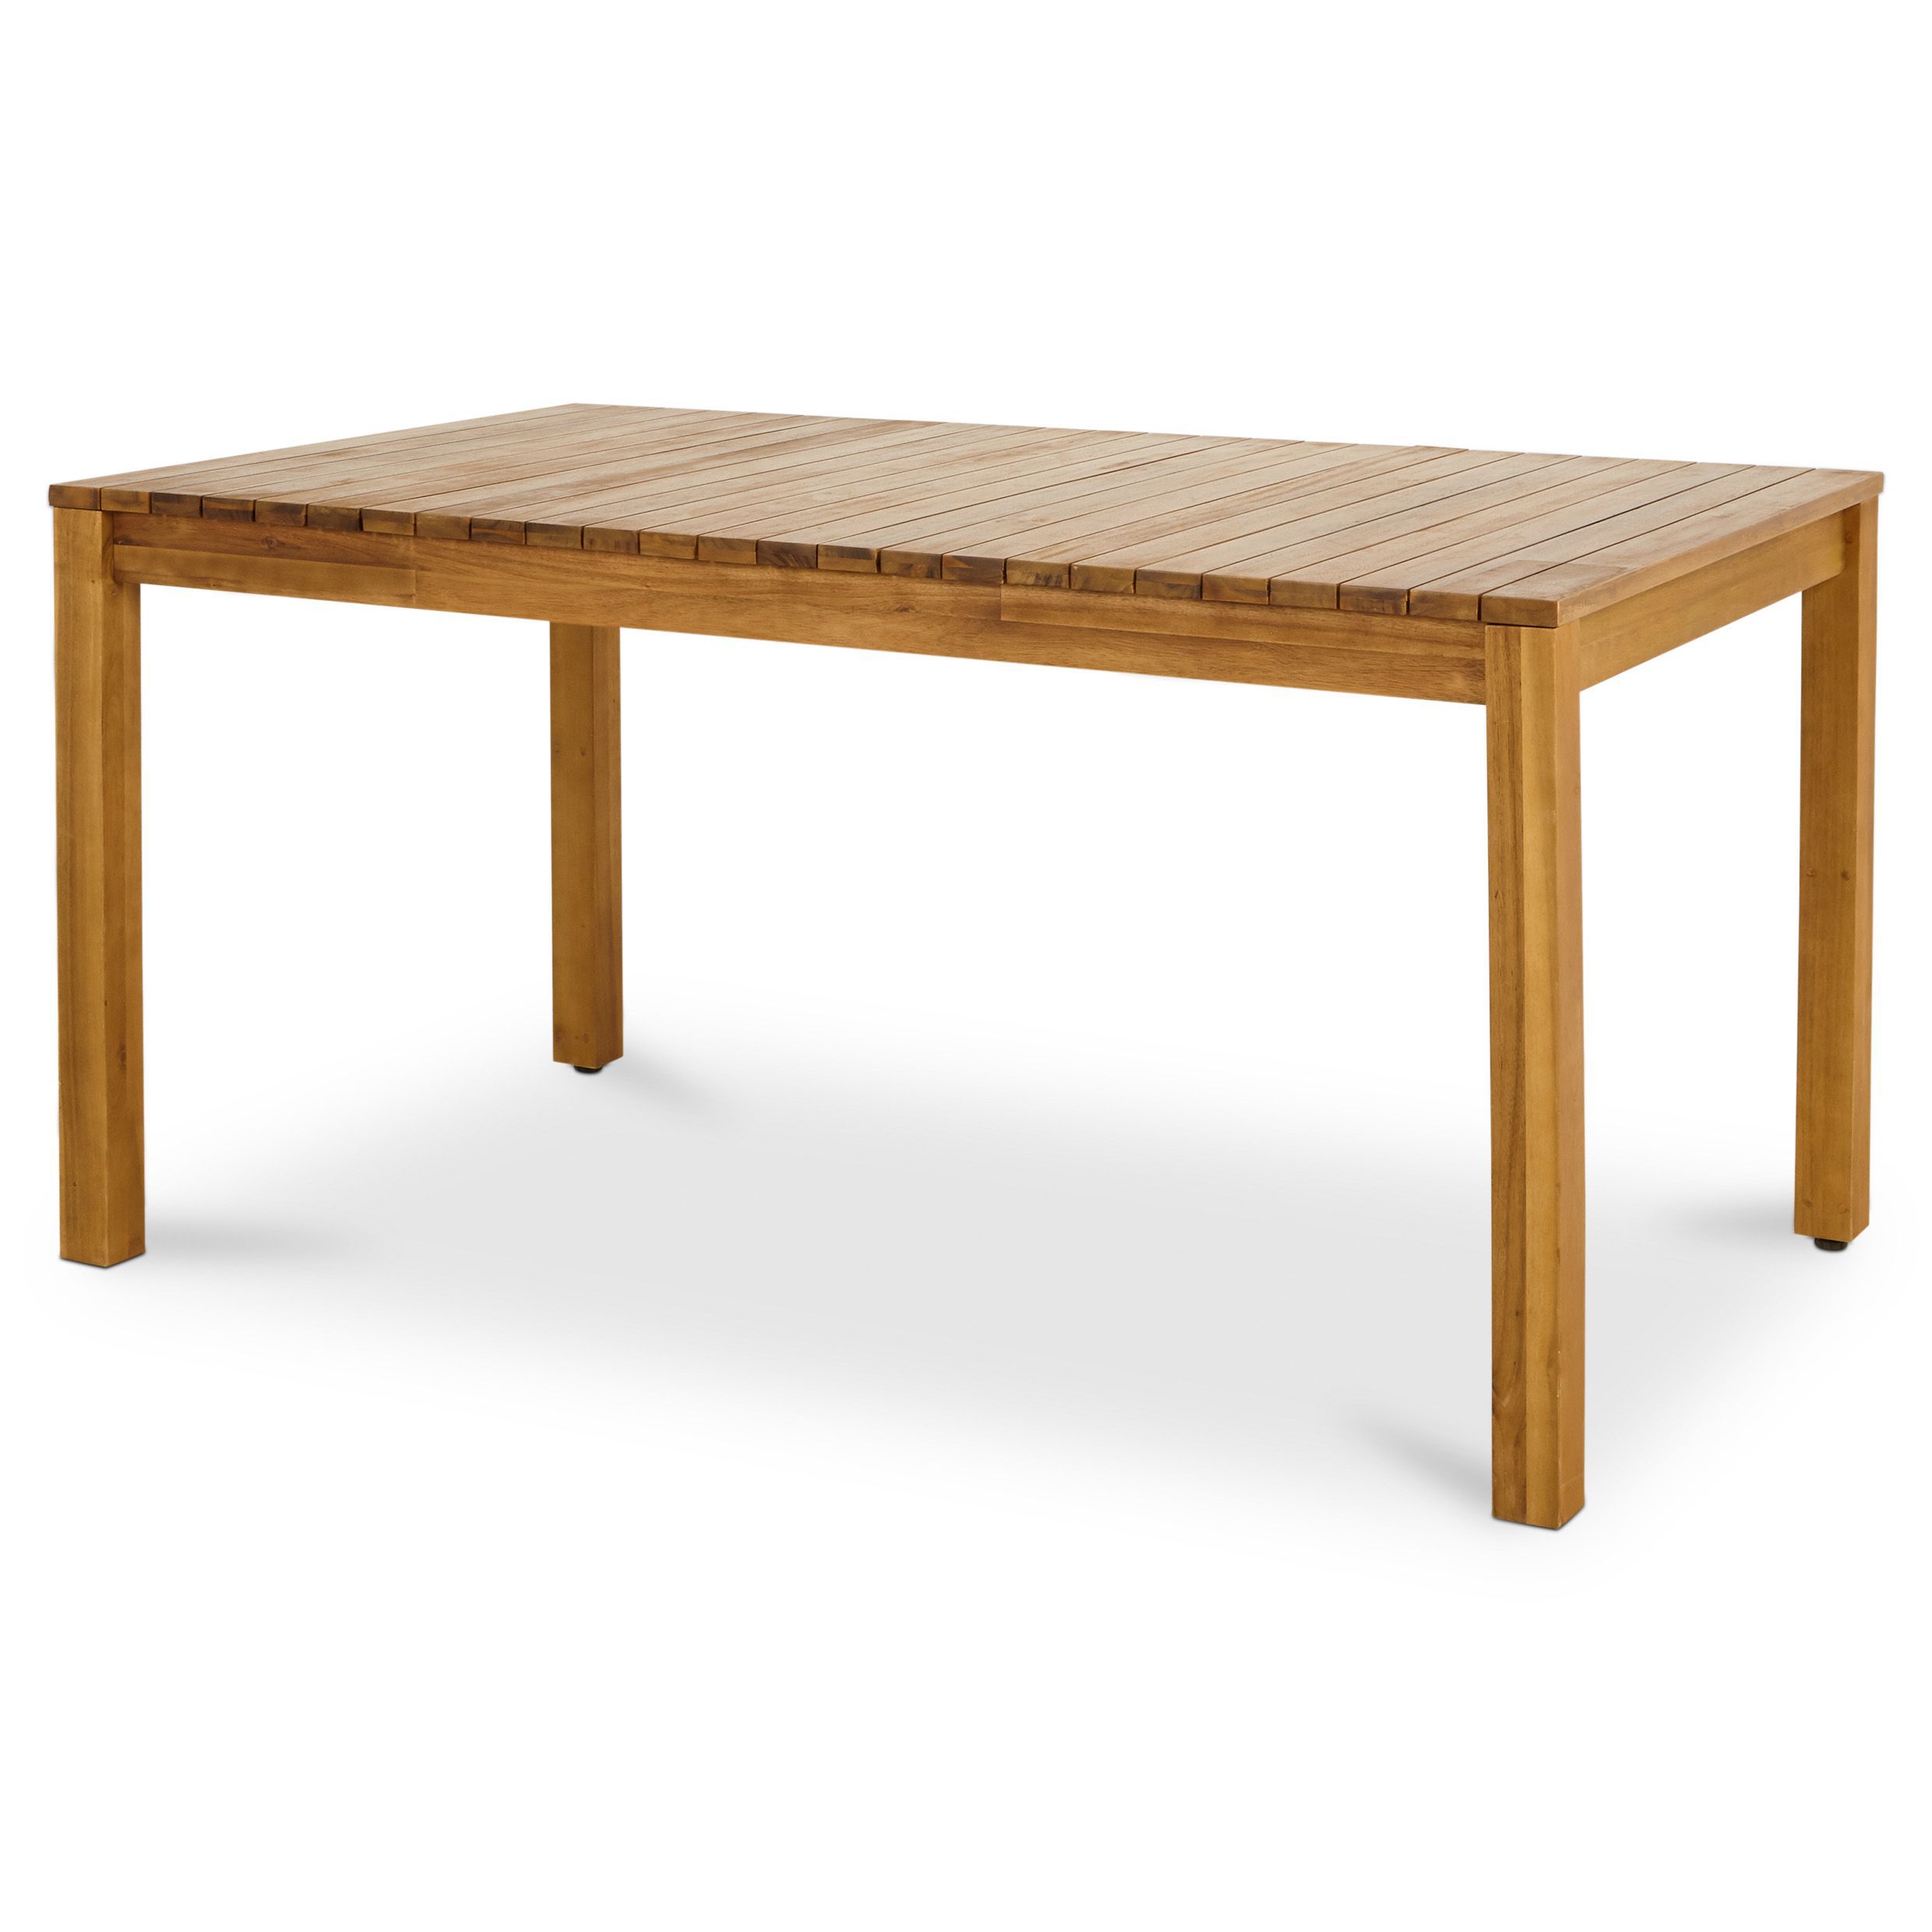 GoodHome Denia Natural Wooden 6 seater Rectangular Table